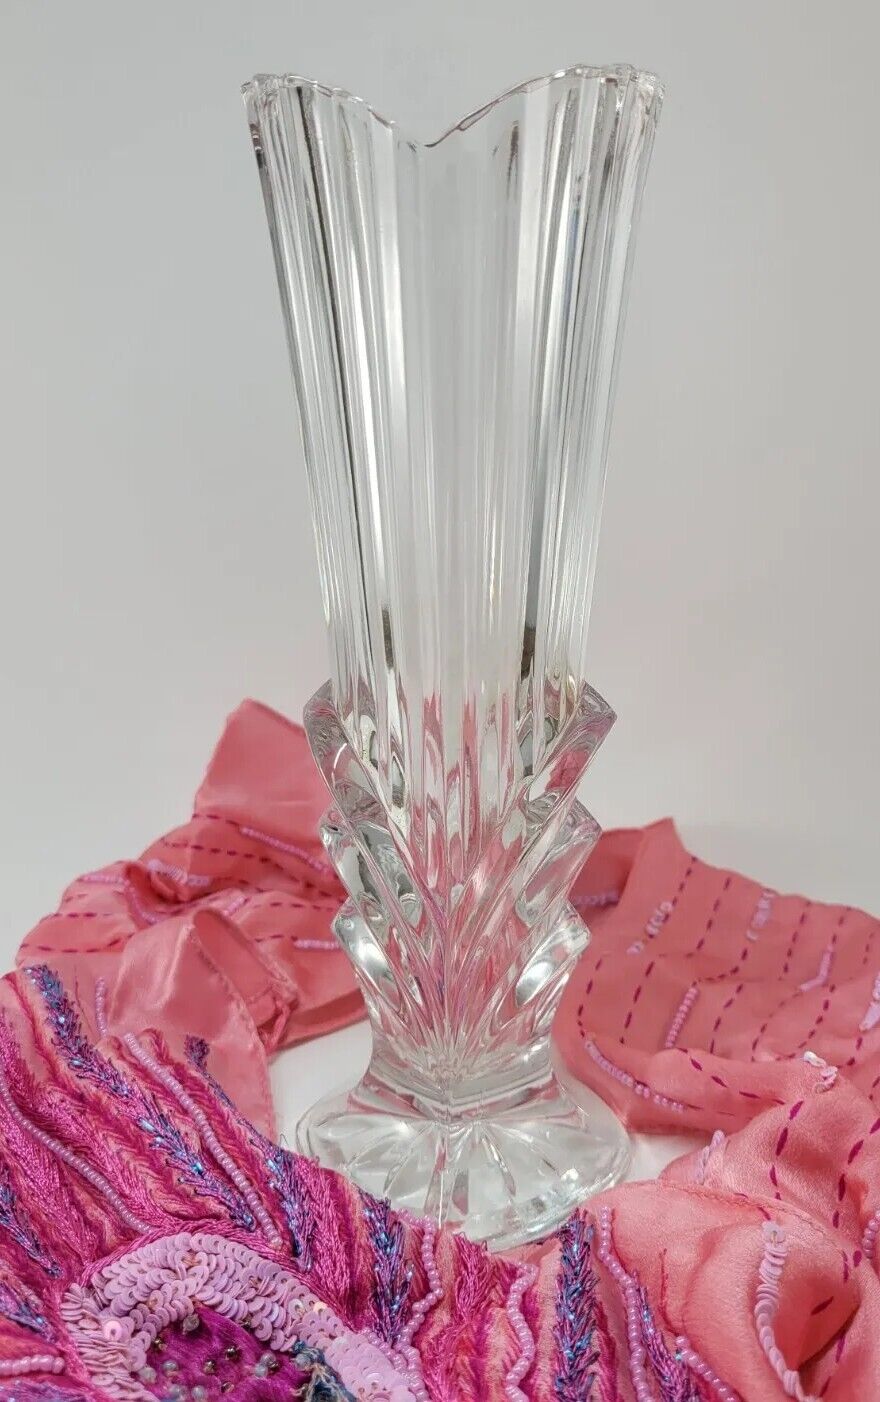 Vintage Crystal Vase Art Deco Inspired with Heart Shape at Top with Square Base